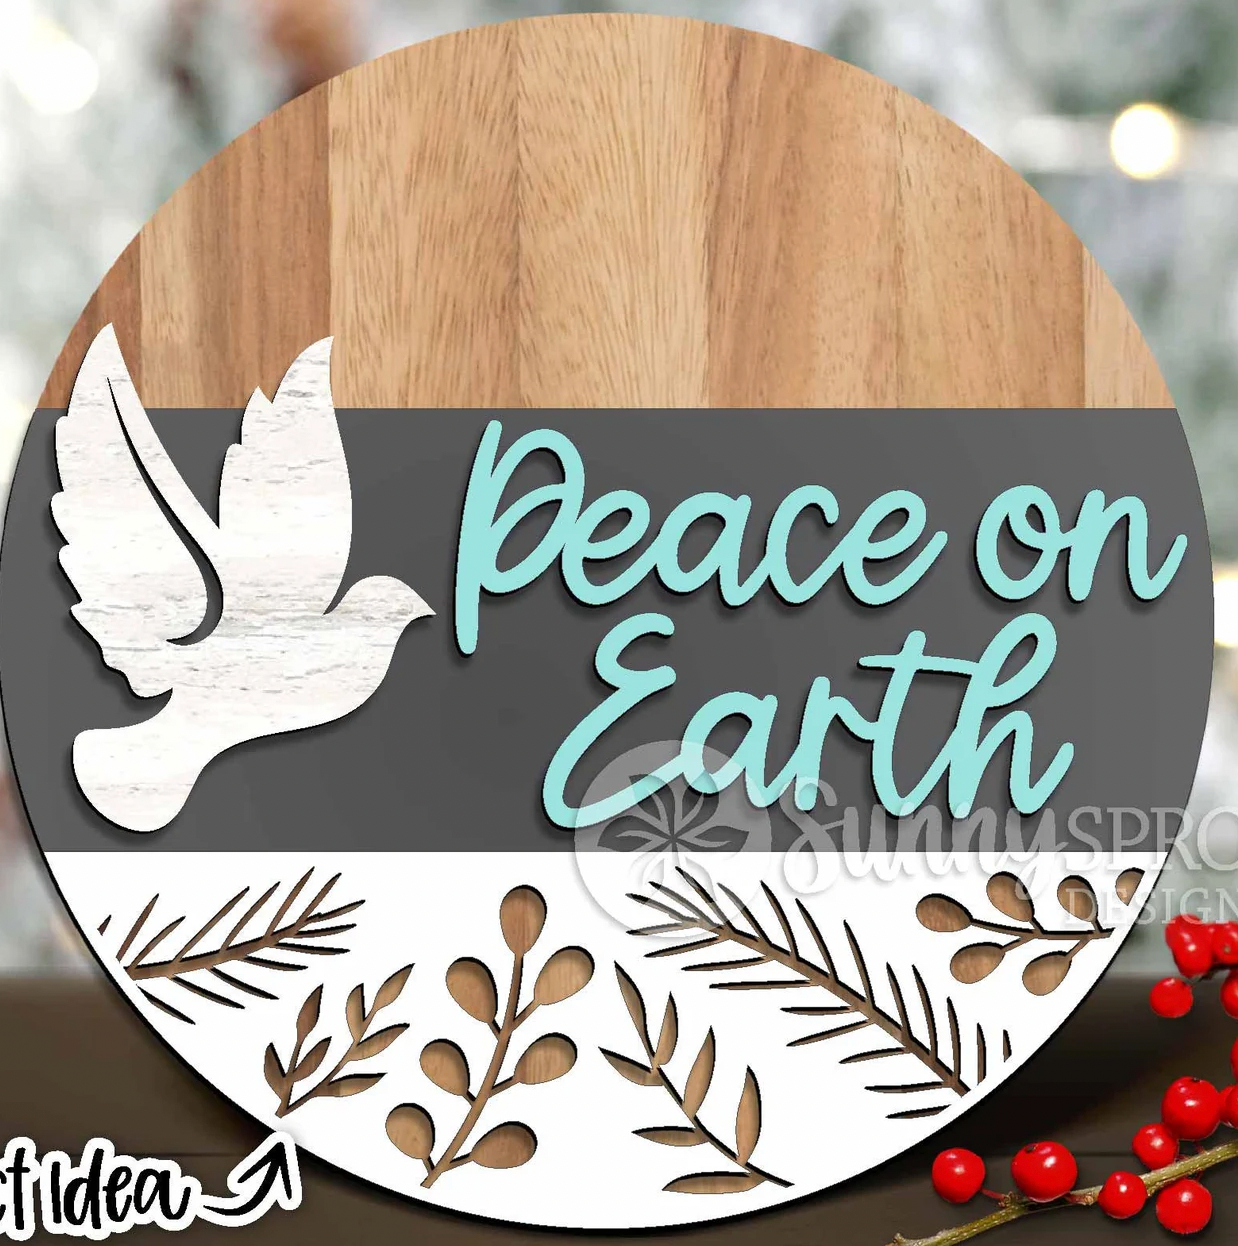 Peace on Earth Door Hanager